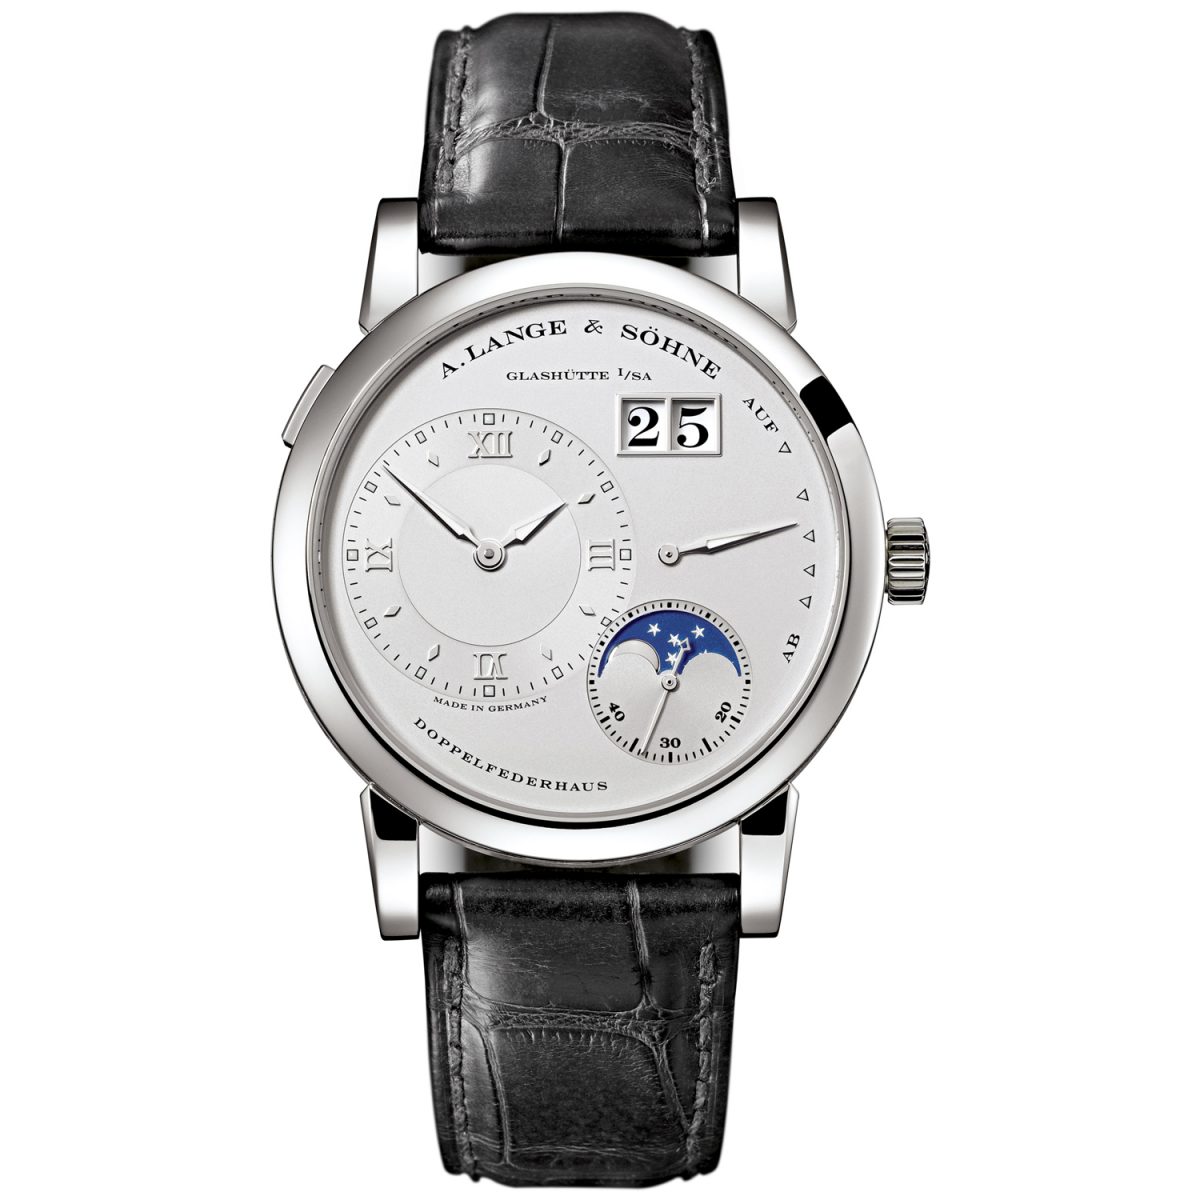 Video Review Of UK Charming A. Lange & SöHne Lange 1 Moon Phase Replica Watches